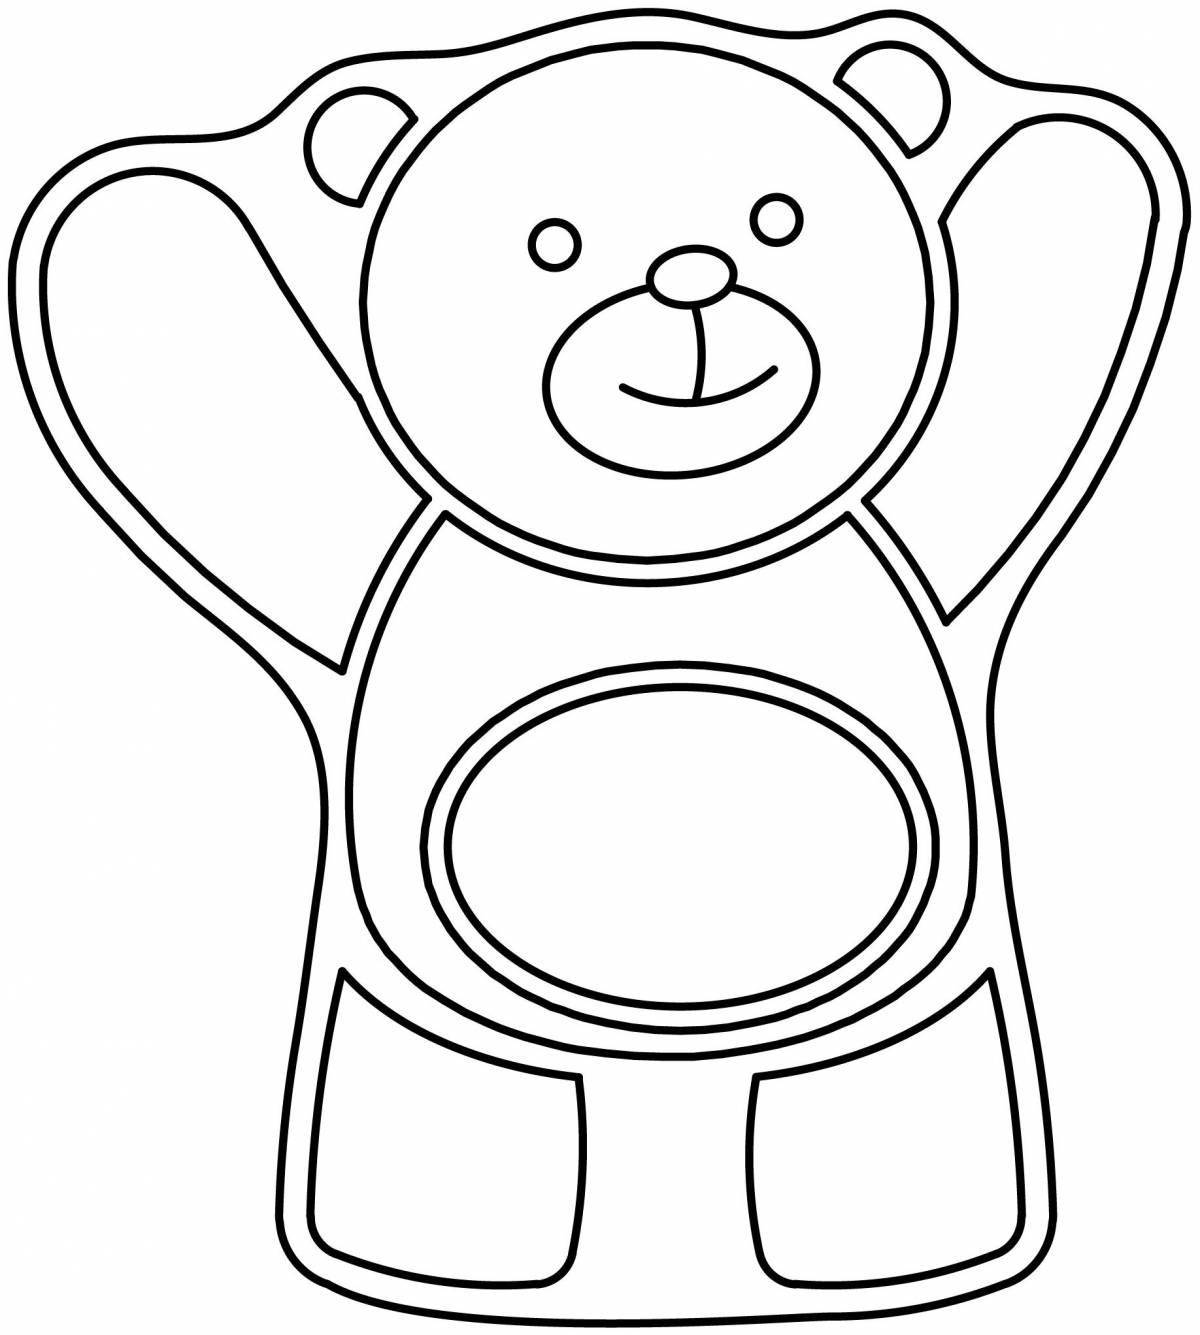 Coloring book joyful bear for children 4-5 years old